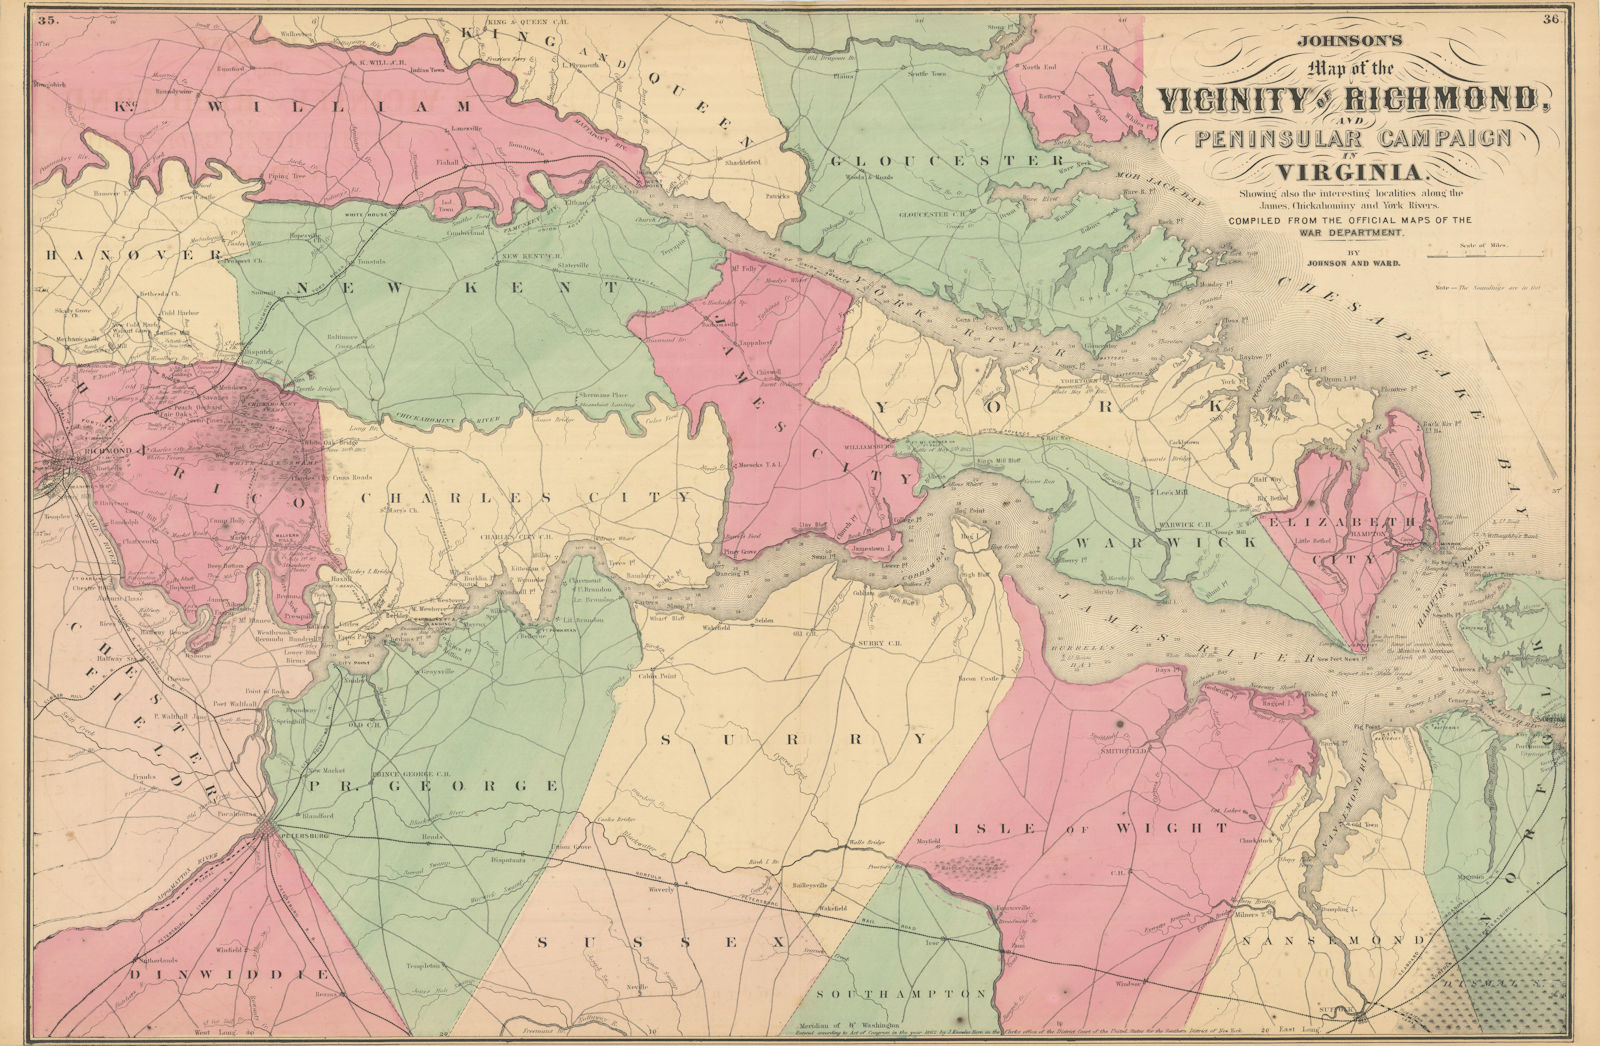 Associate Product Vicinity of Richmond & Peninsular Campaign in Virginia. JOHNSON 1866 old map